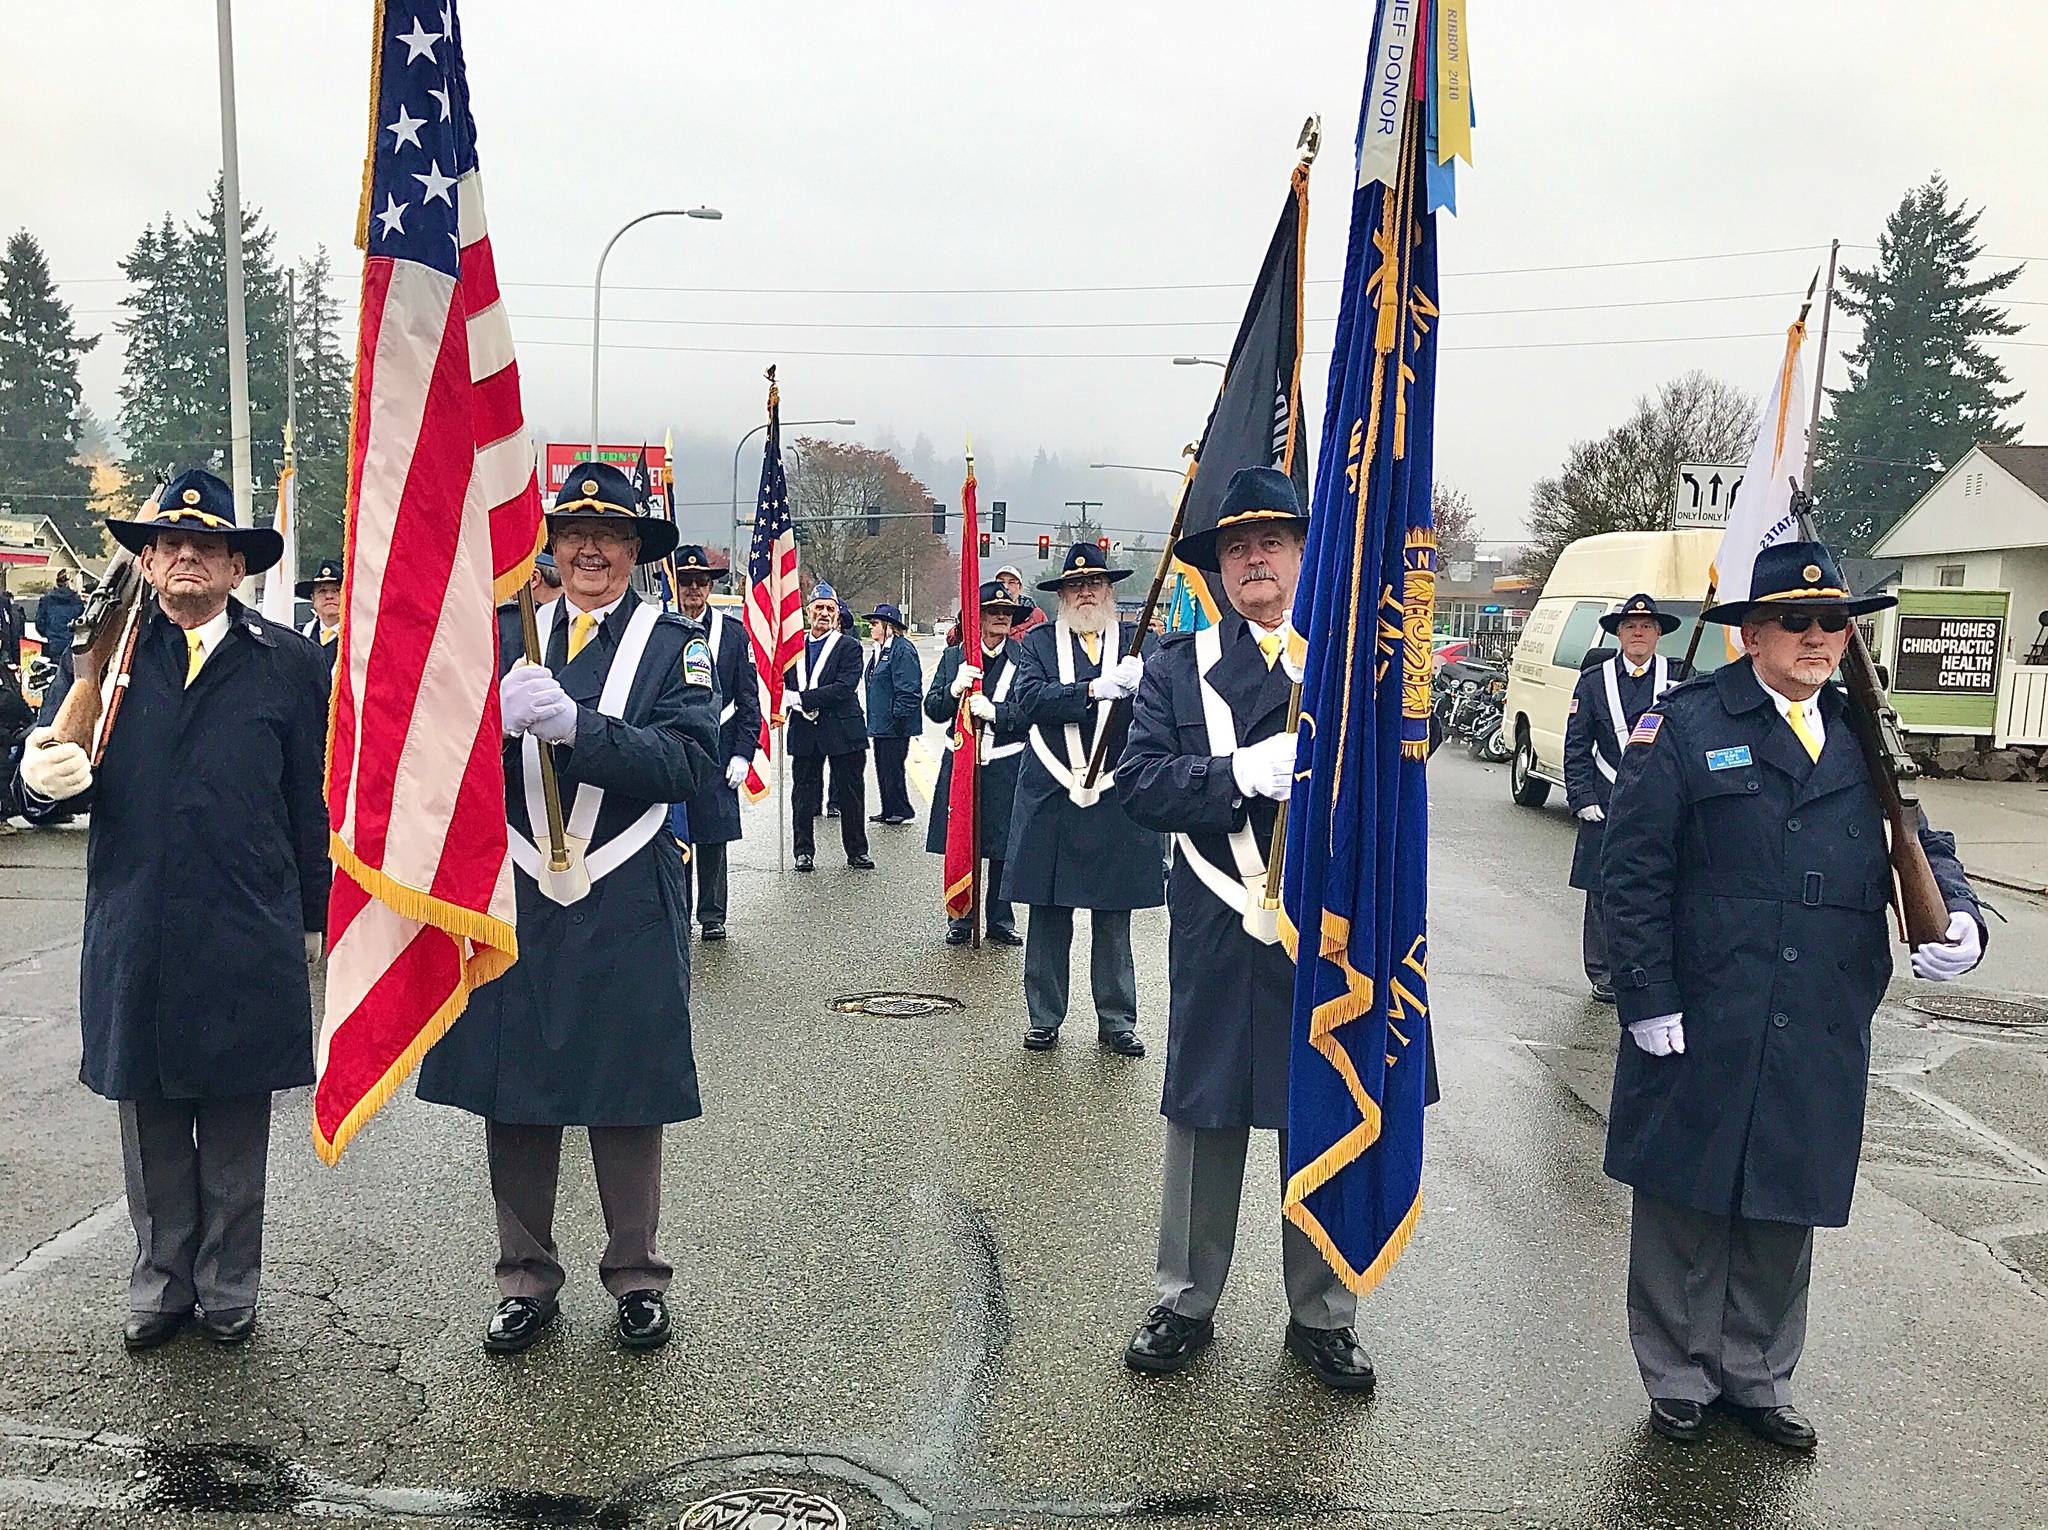 Legionnaires of Post 15 of the American Legion’s Color/Honor Guard prepare to represent the city of Kent at the 54th annual Auburn Veterans Parade on Saturday. Don Whittington, commander of Post 15, led the Legionnaires Color/Honor Guard. COURTESY PHOTO, Chriss Moen